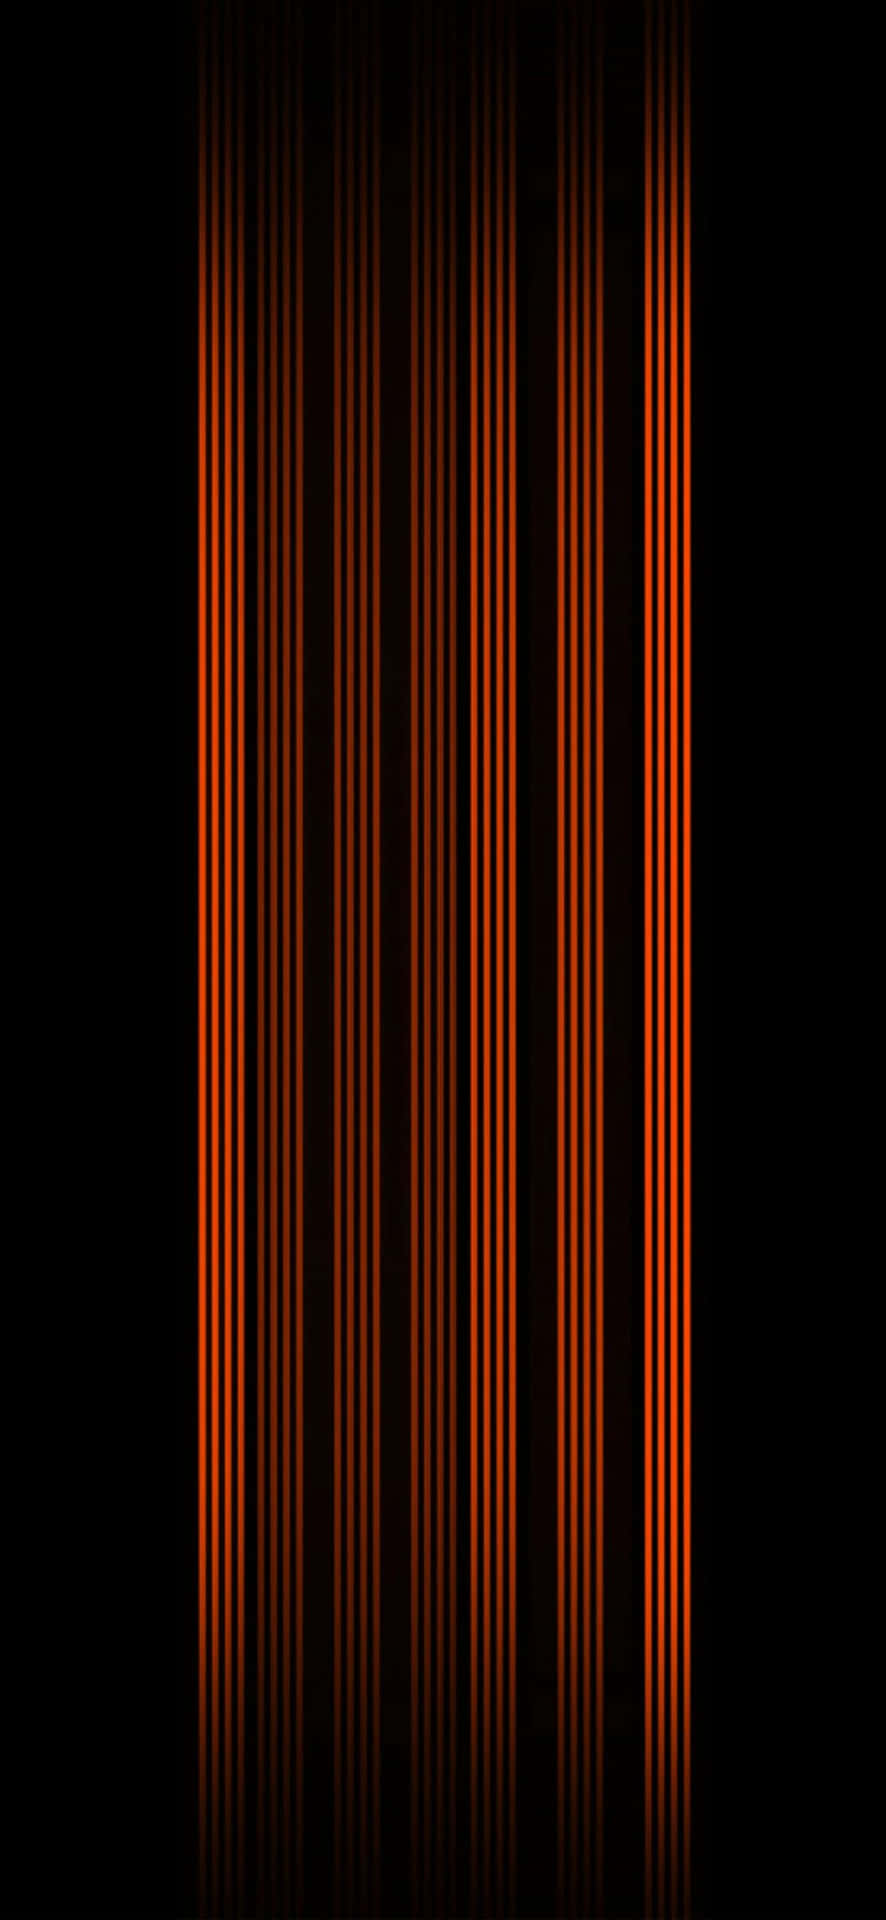 Abstract Orange Vertical Lines Background Wallpaper